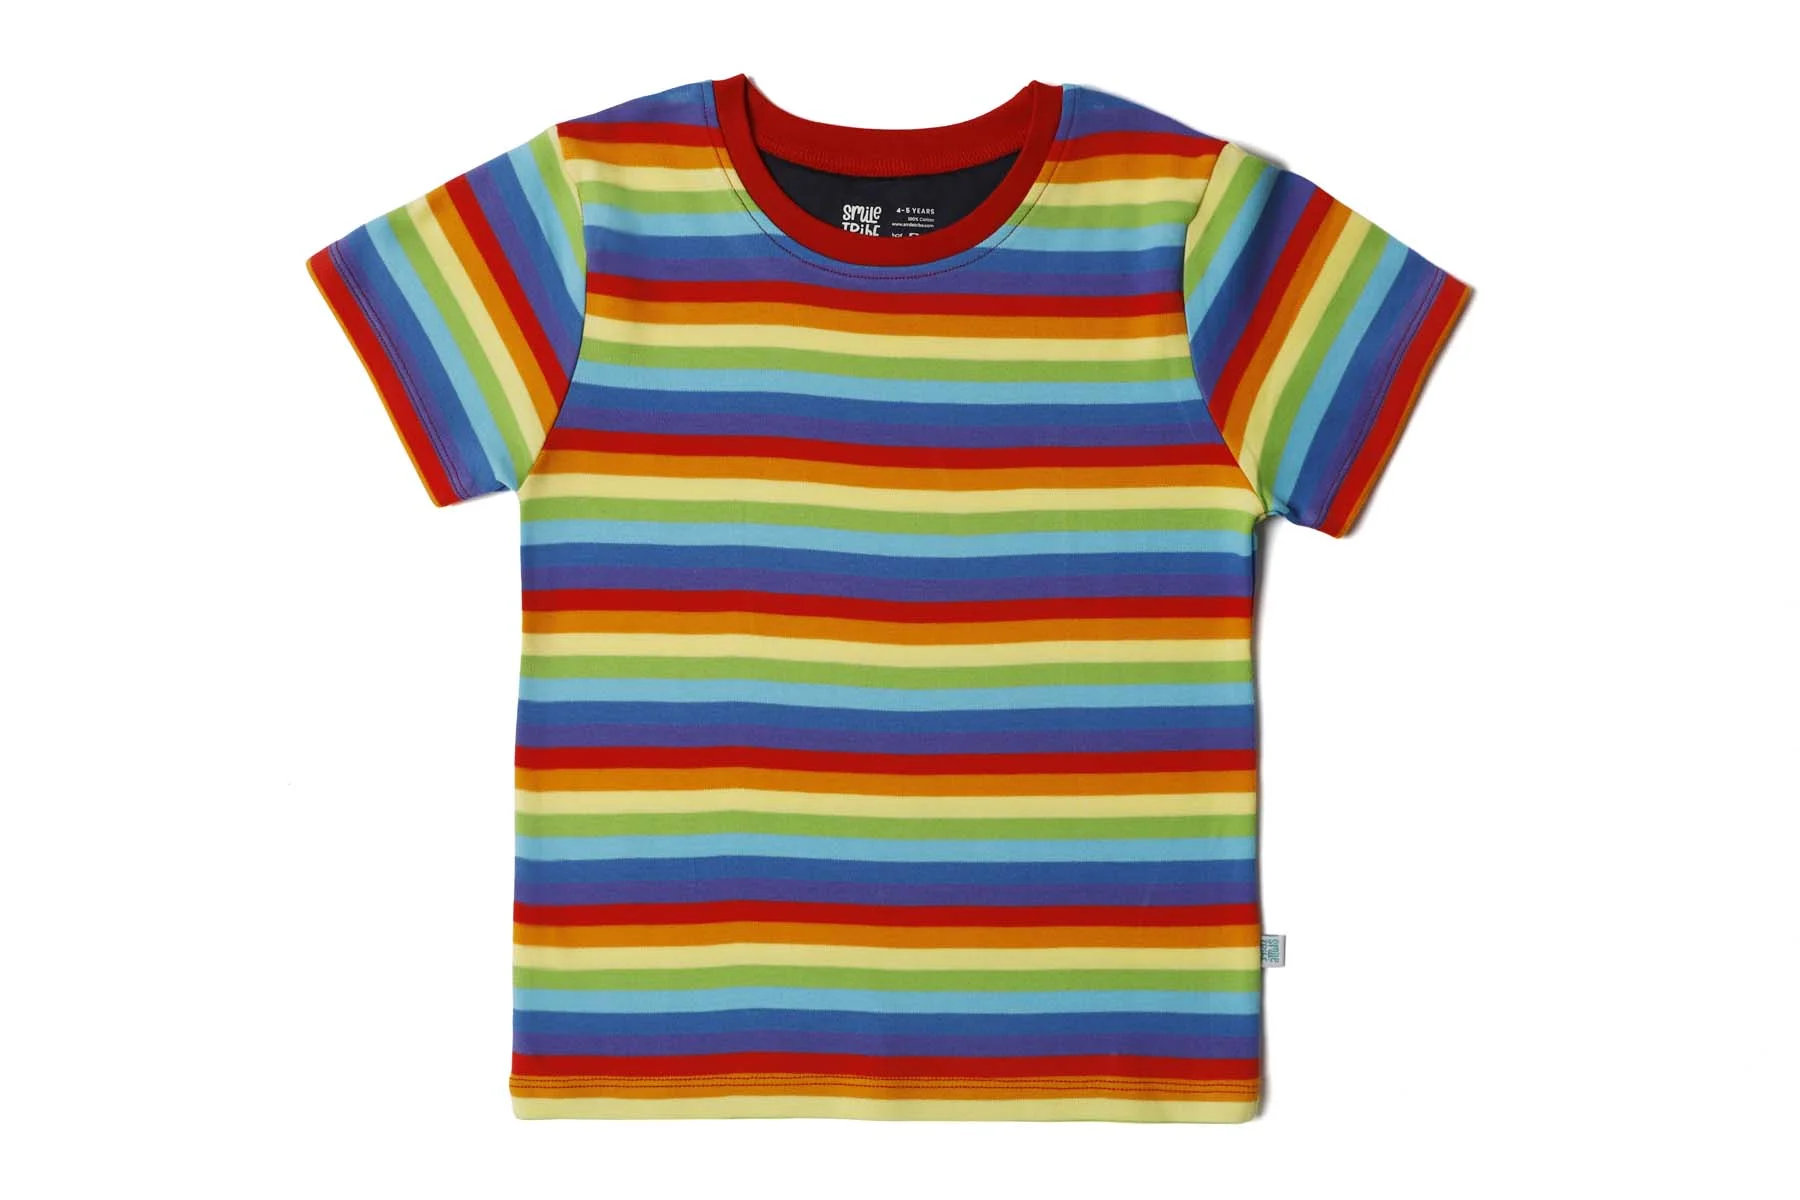 Premium Kids T-shirt at Rainbow Prices Great - Clothing